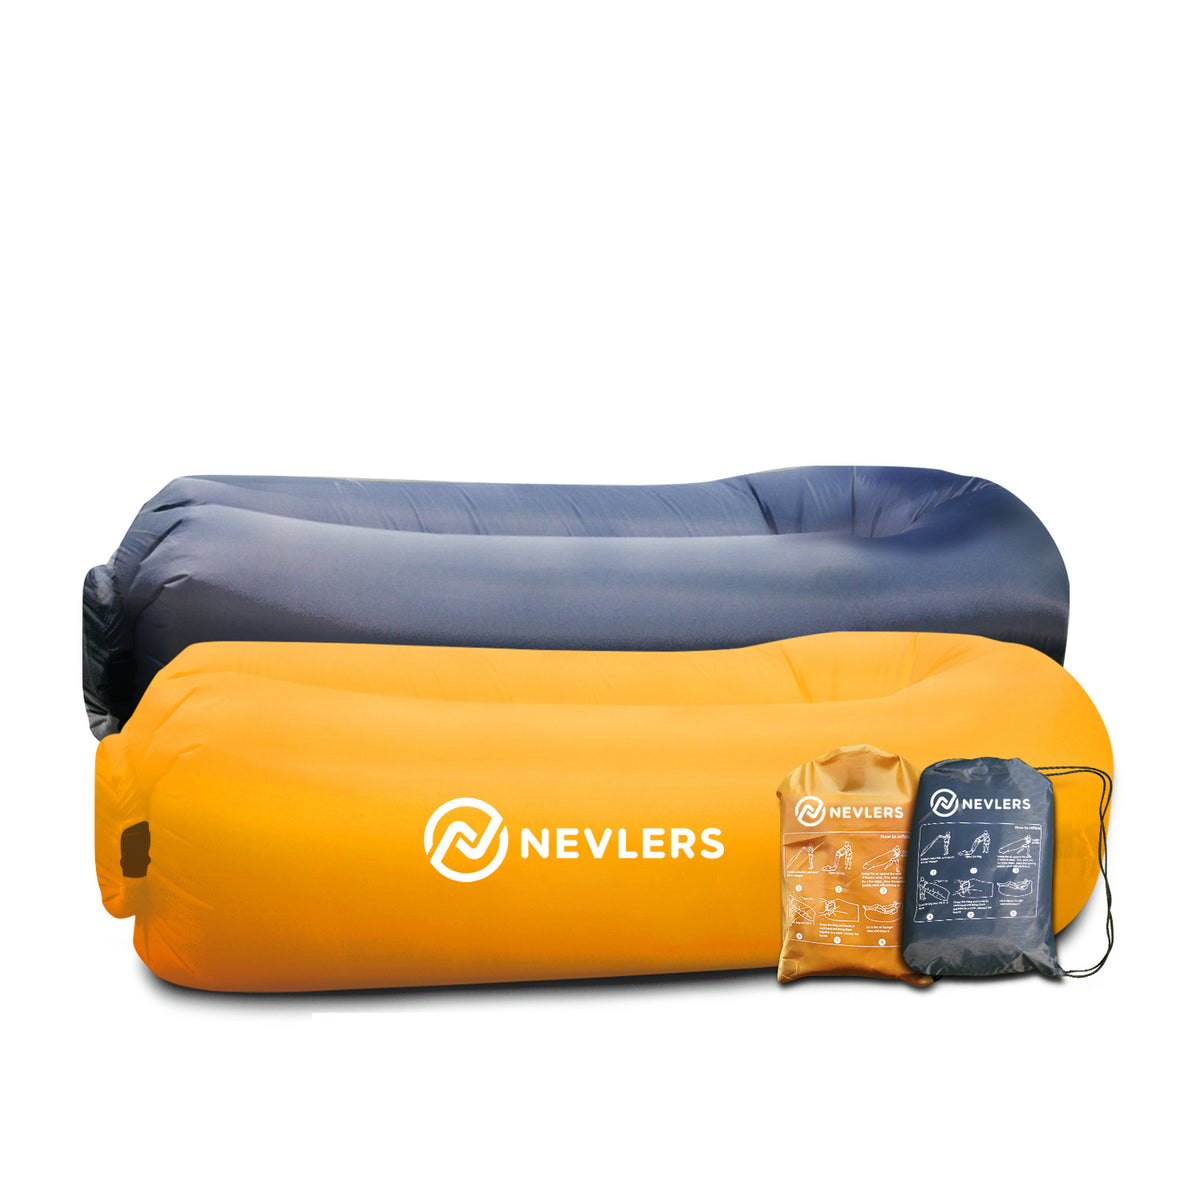 Inflatable Loungers - Navy/Saffron - 2 Pack